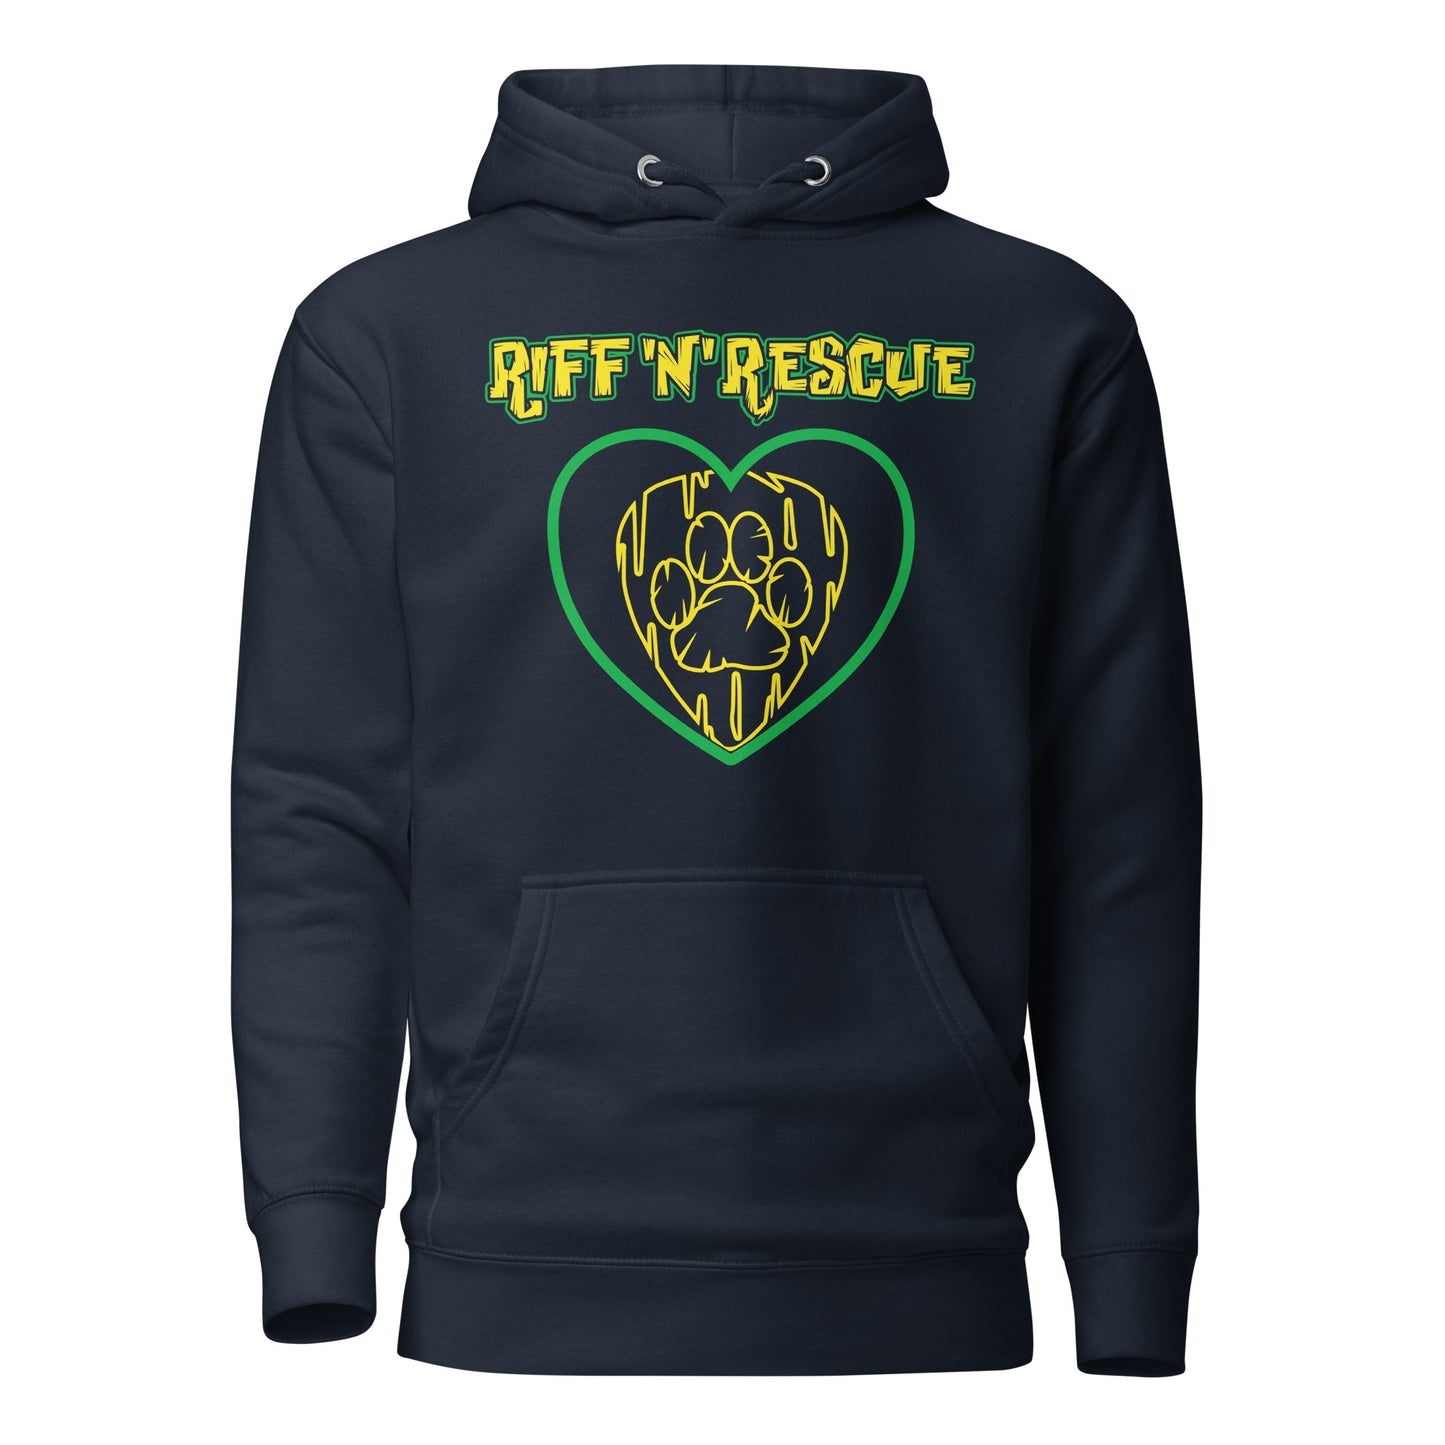 Hearts and Paws Green Dog Unisex Hoodie